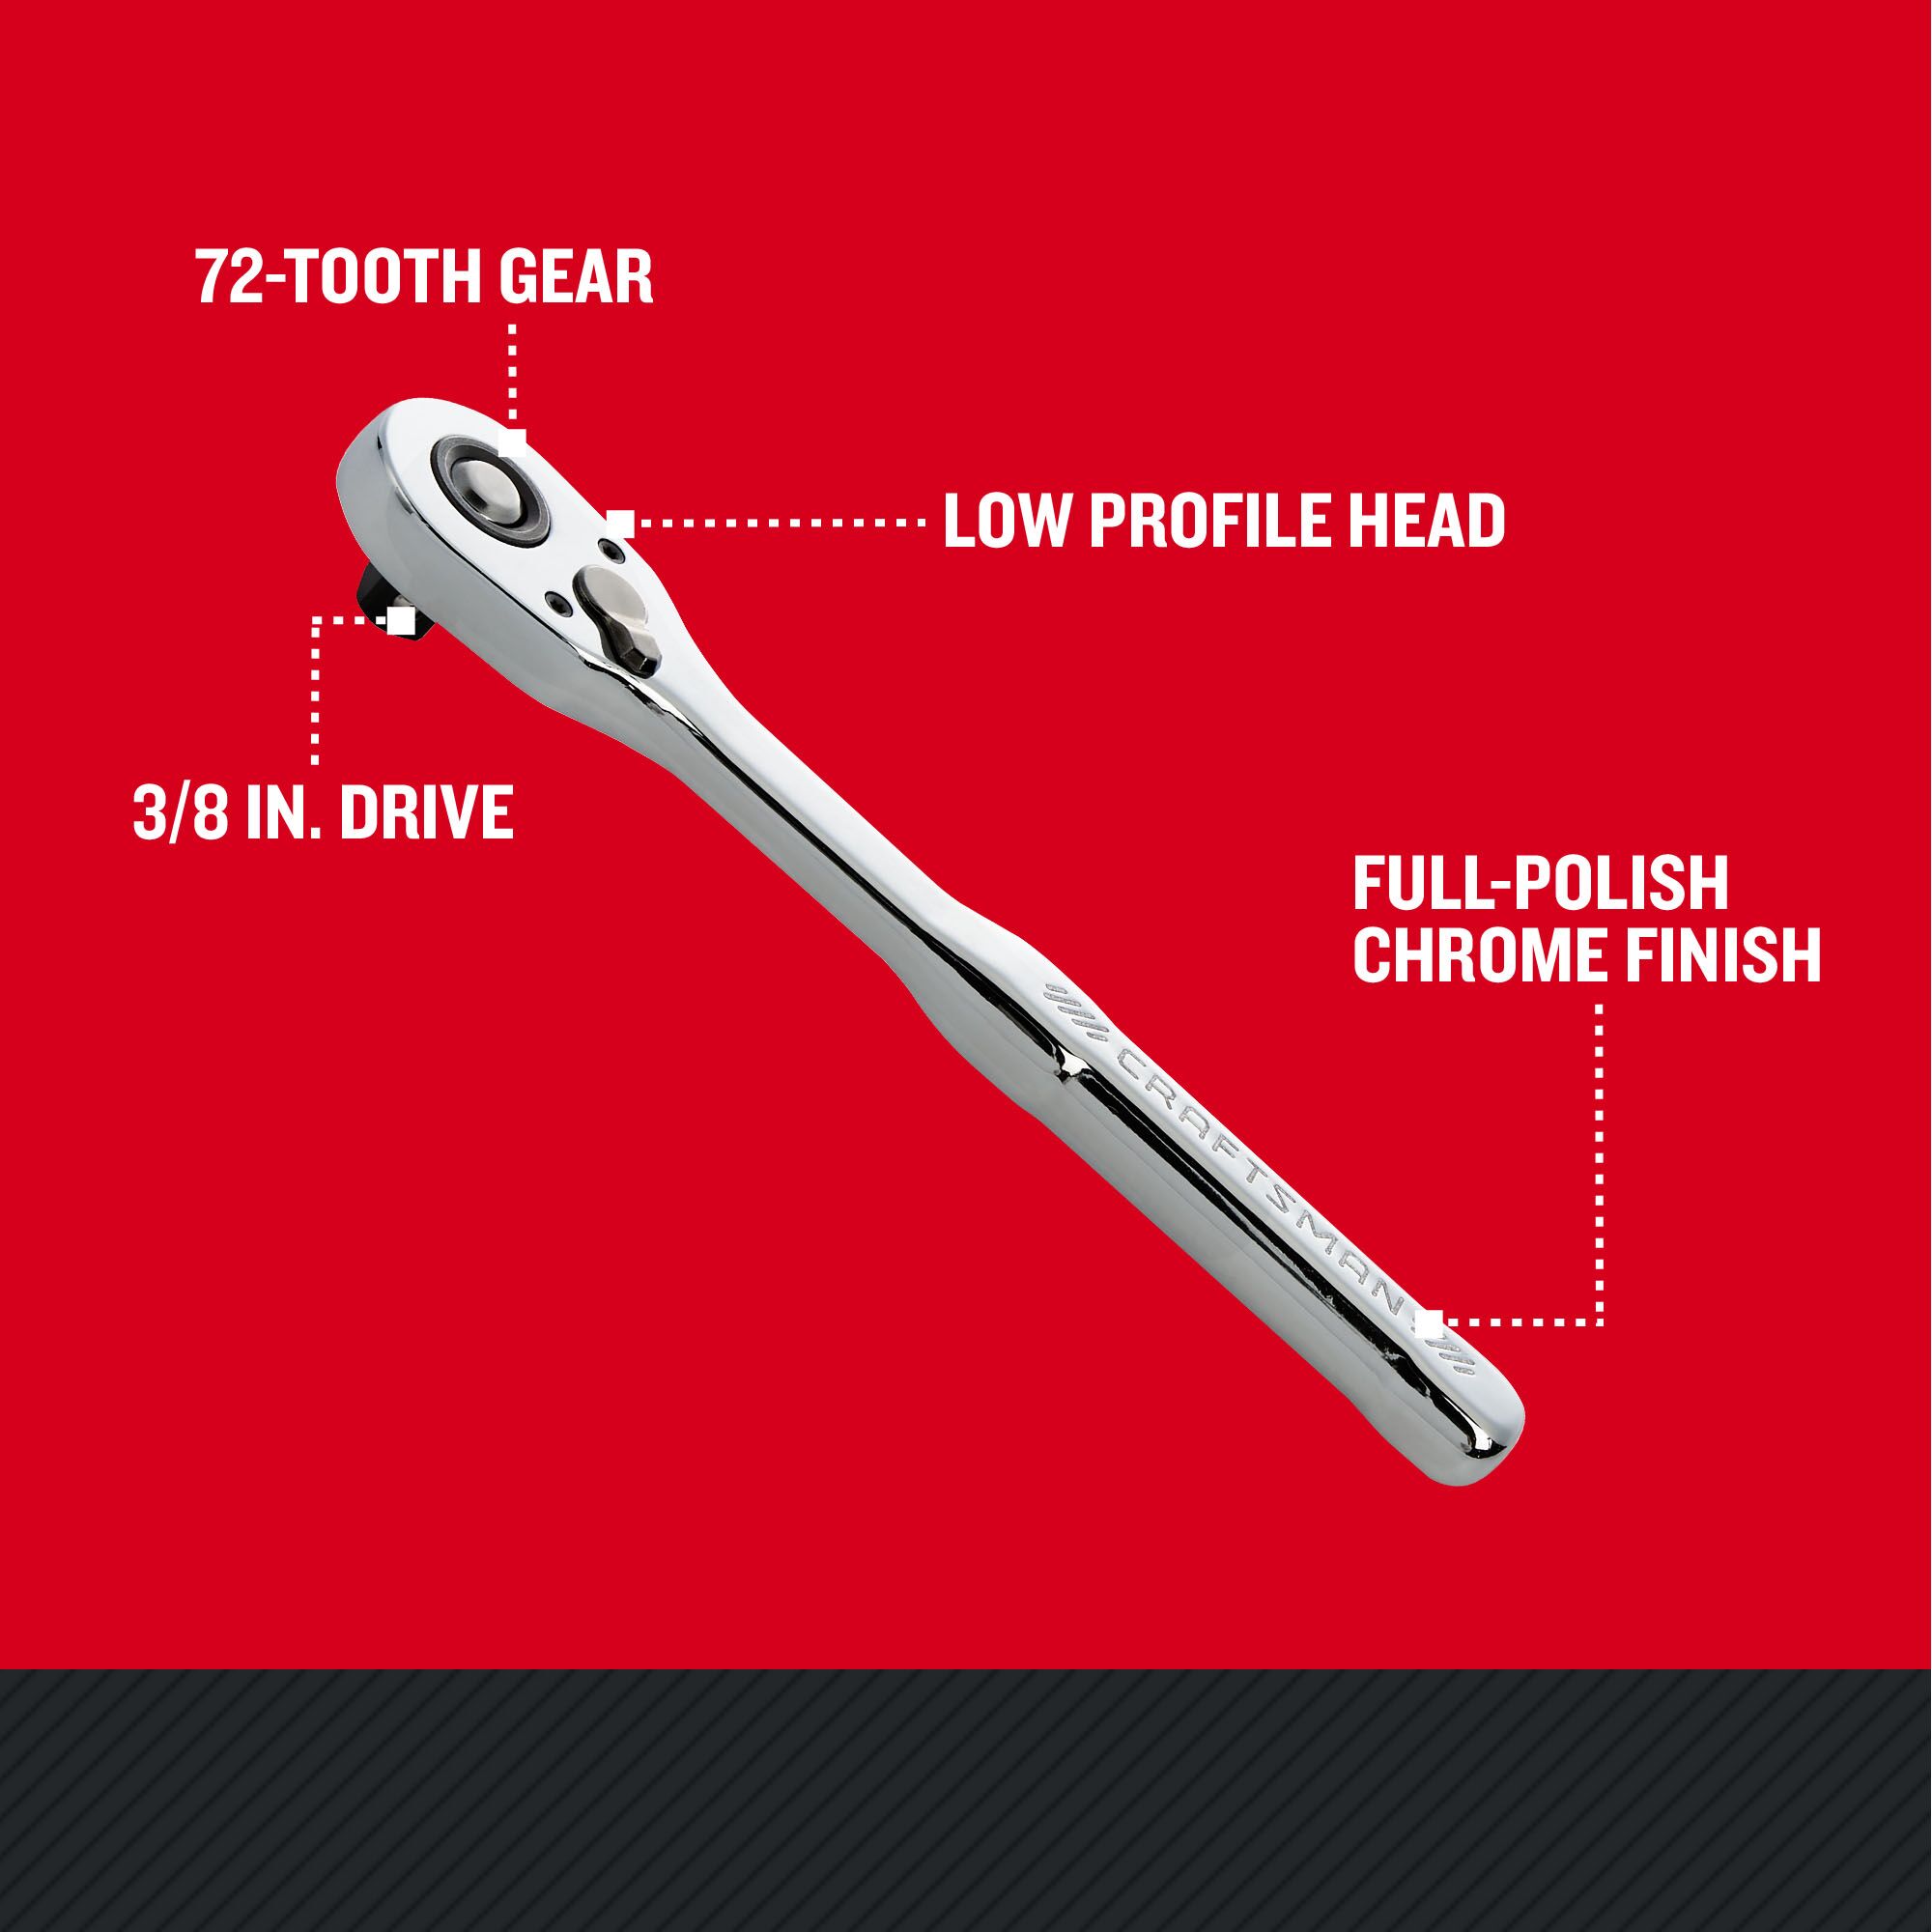 CRAFTSMAN 72-Tooth 3/8-in Drive Full Polish Handle Ratchet in the 